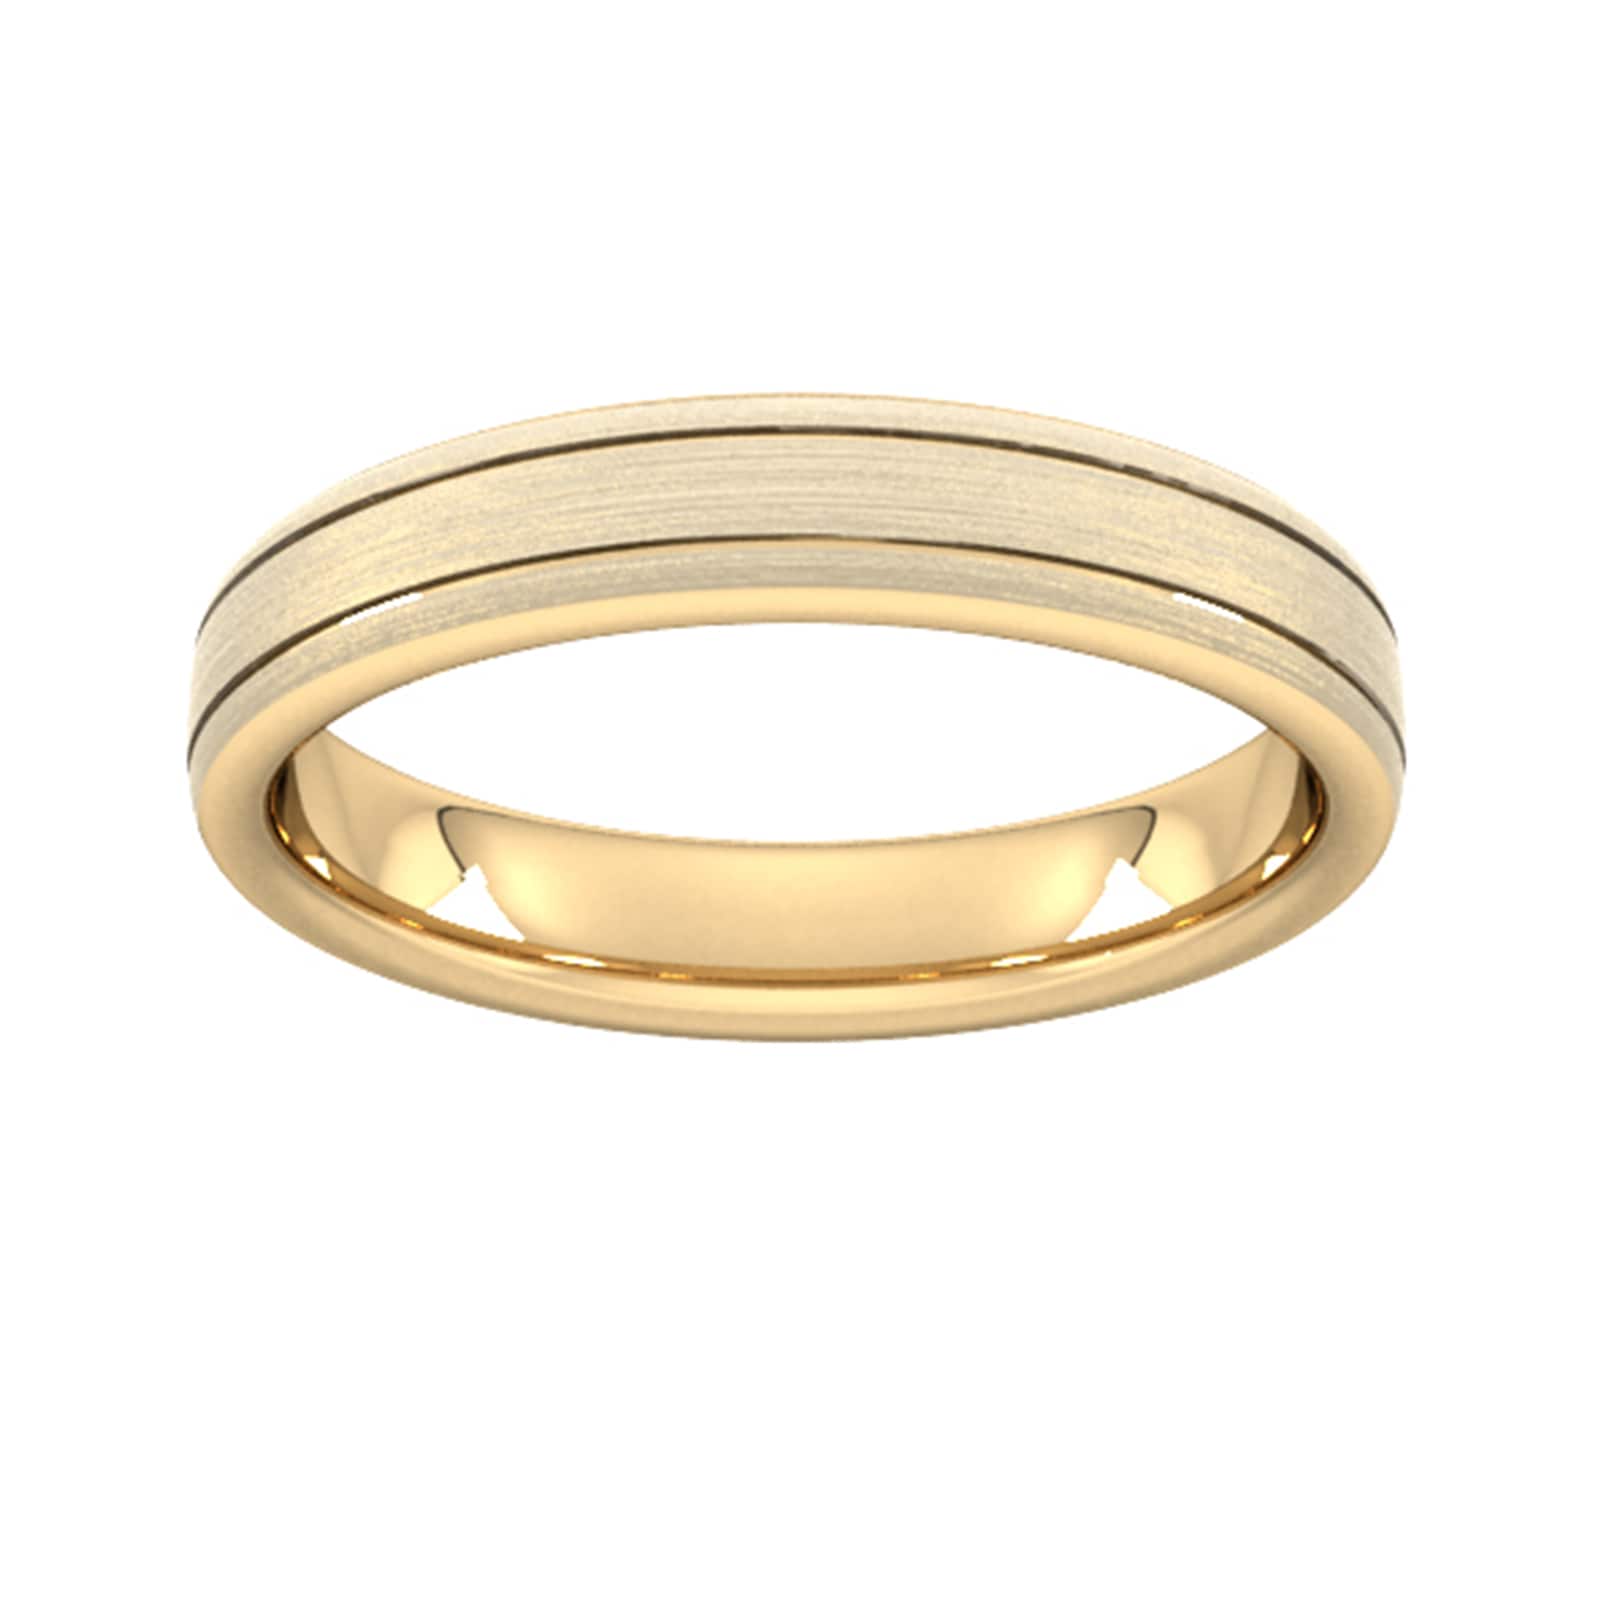 4mm D Shape Heavy Matt Finish With Double Grooves Wedding Ring In 18 Carat Yellow Gold - Ring Size T